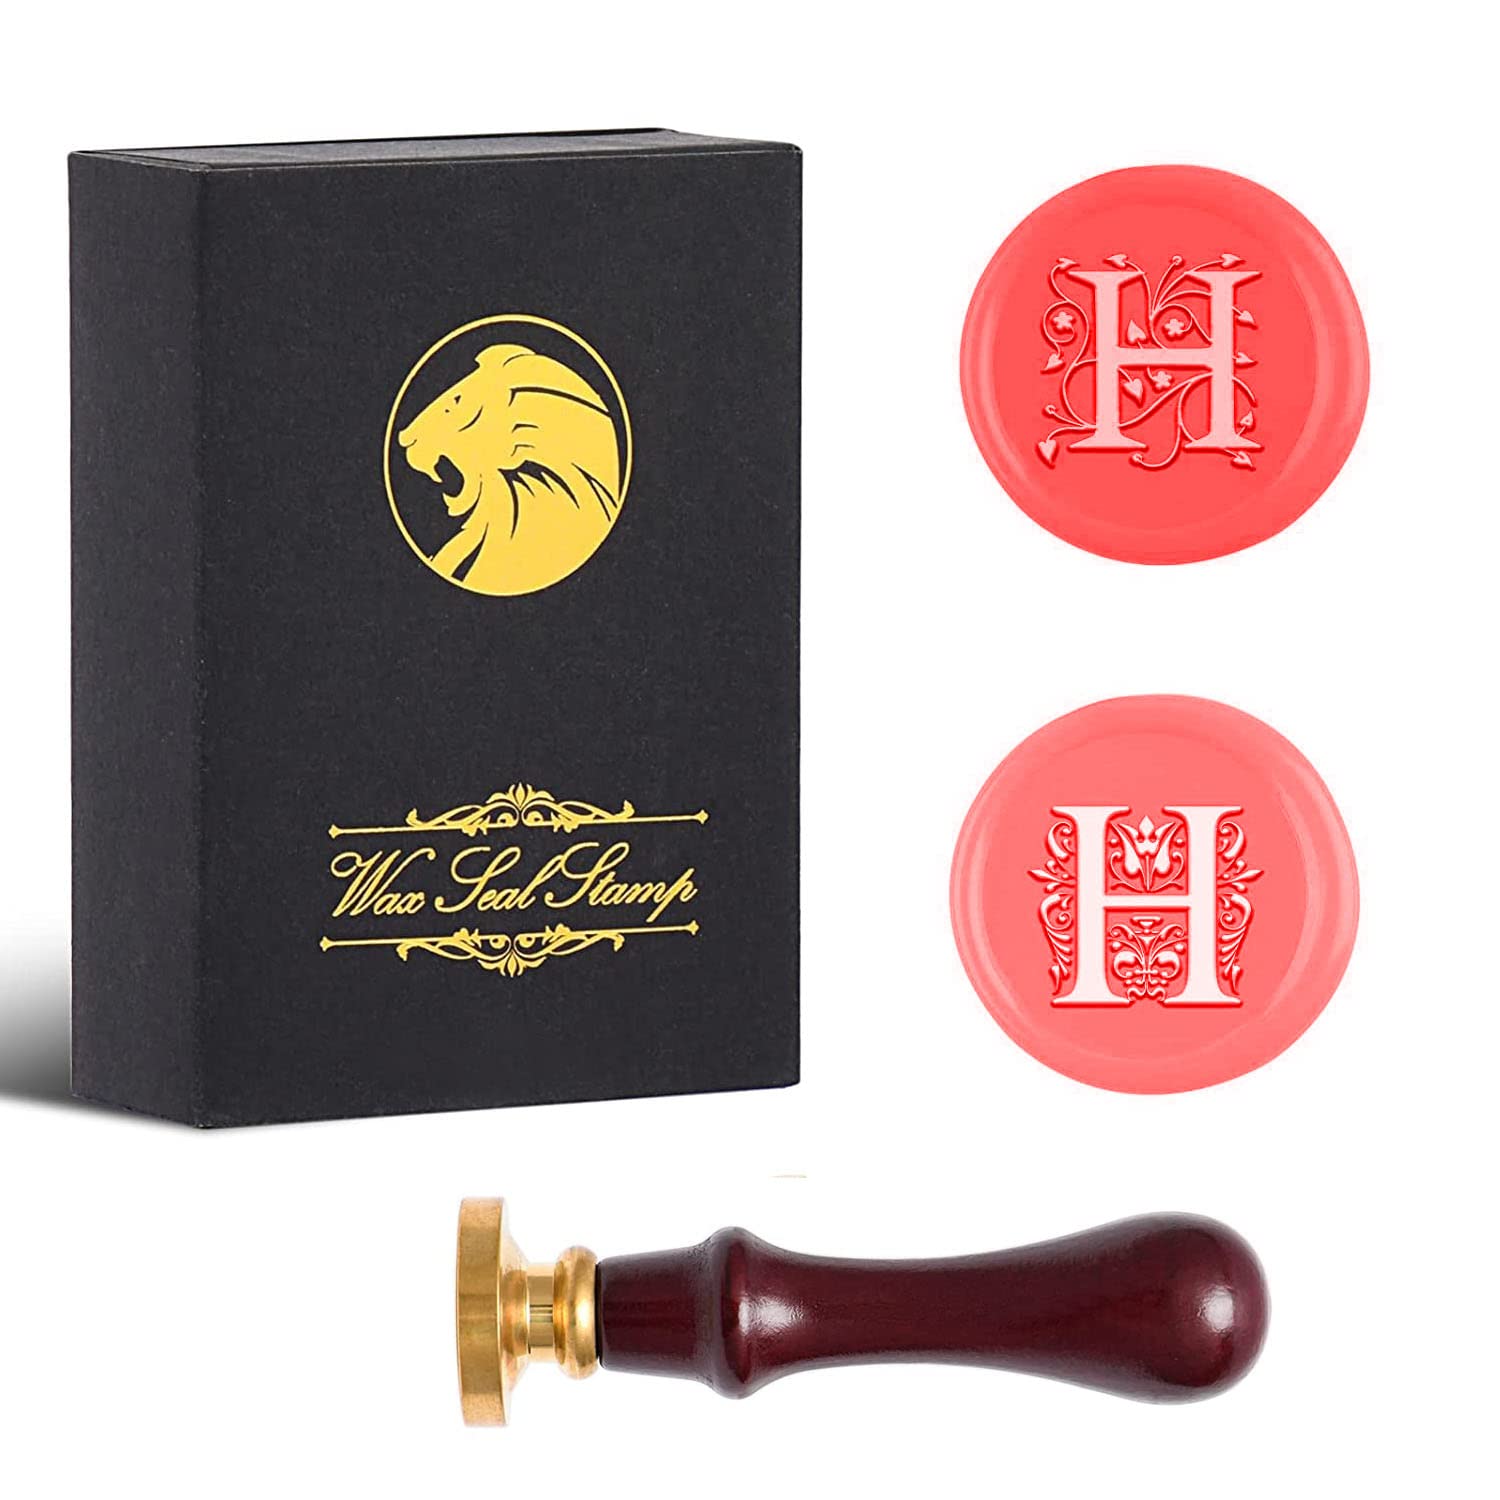 iTERYOU 2Pcs Letter H Wax Seal Stamp with Gift Box A to Z Series Wax Stamp  Letter H Wax Seal Stamp Kit for Thanksgiving